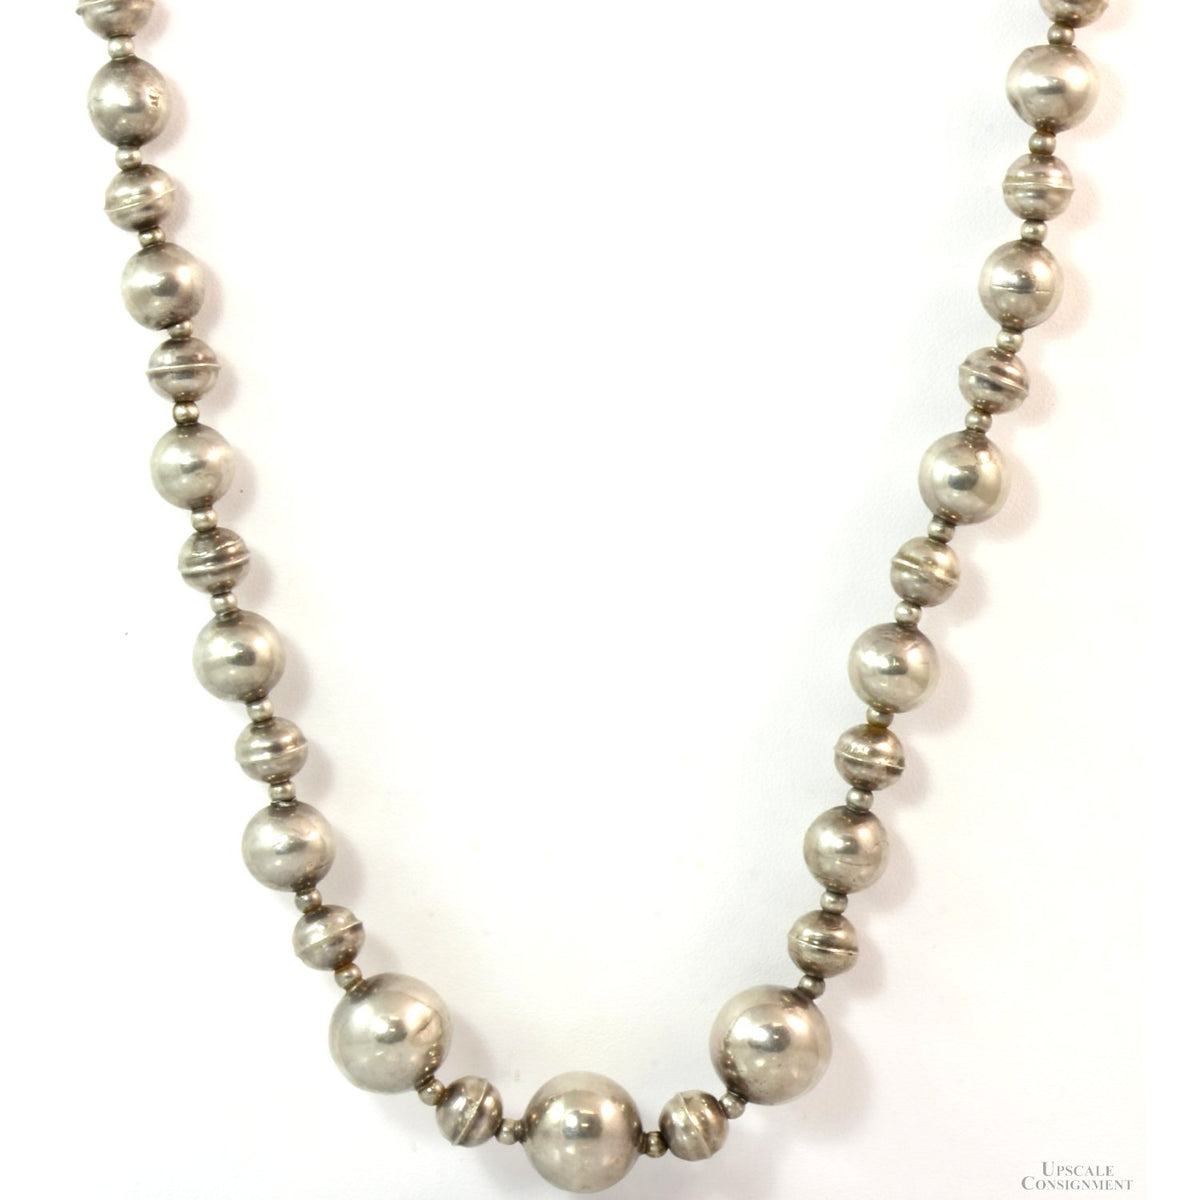 Handcrafted Navajo Pearls 28" Sterling Silver Bead Necklace